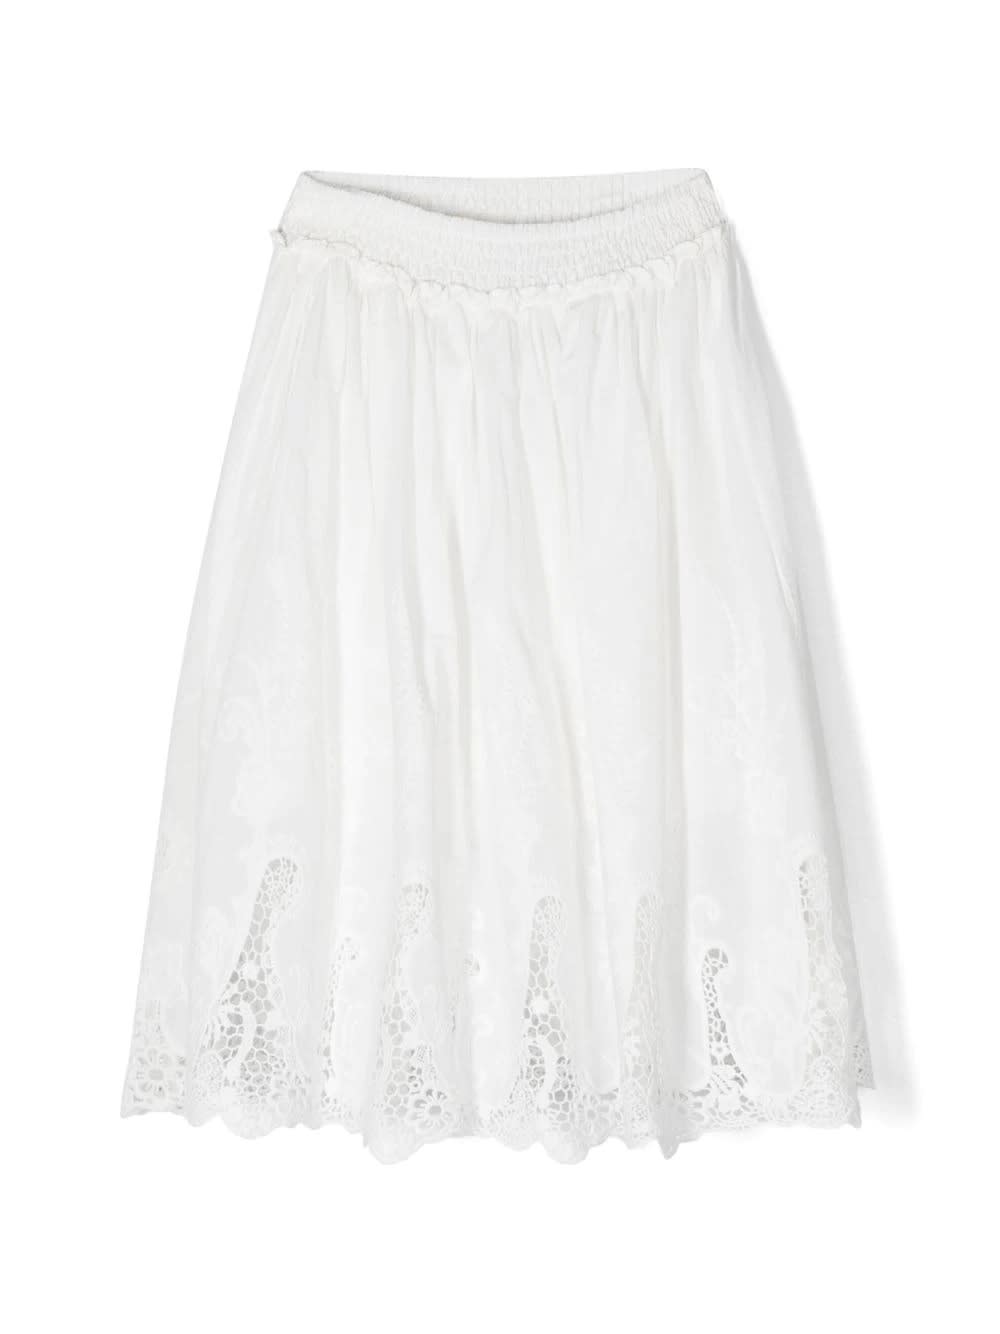 ERMANNO SCERVINO JUNIOR WHITE FLARED SKIRT WITH JAGGED LACE